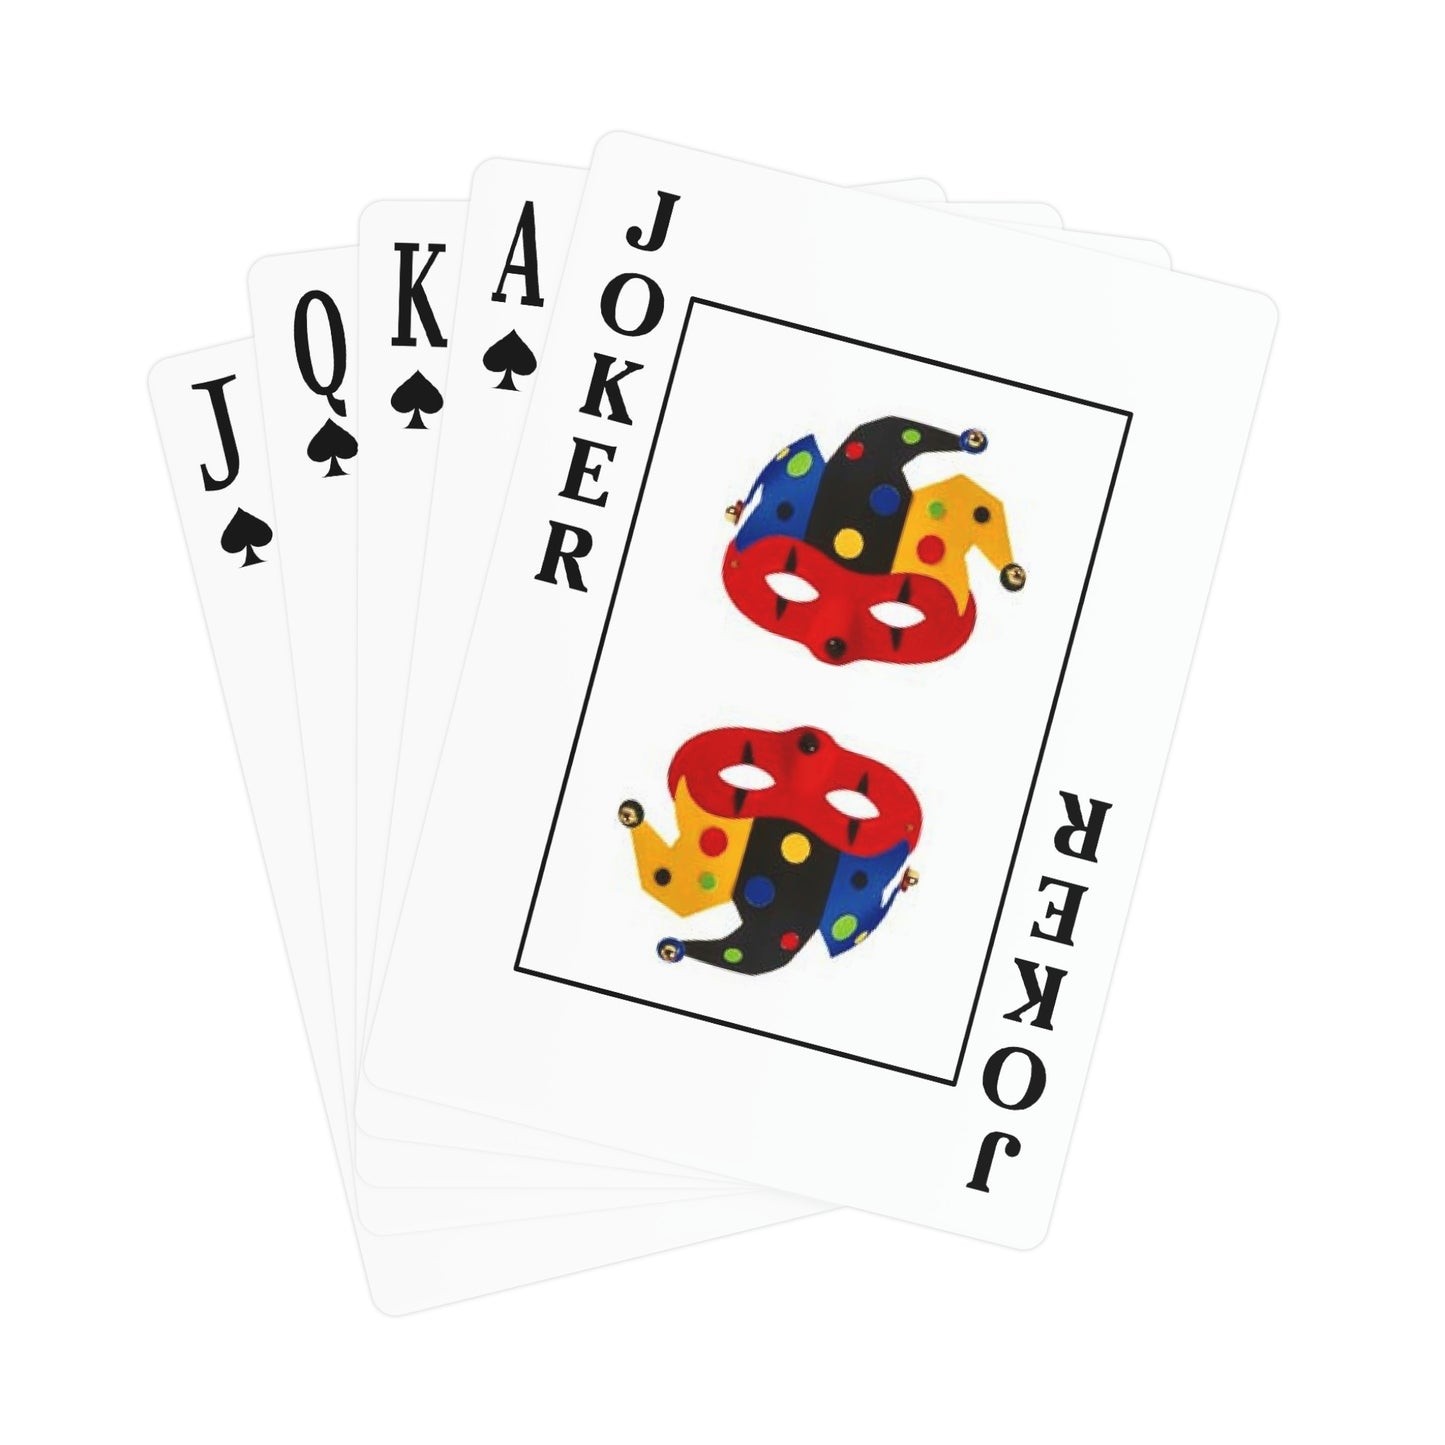 Remembrance - Playing Cards